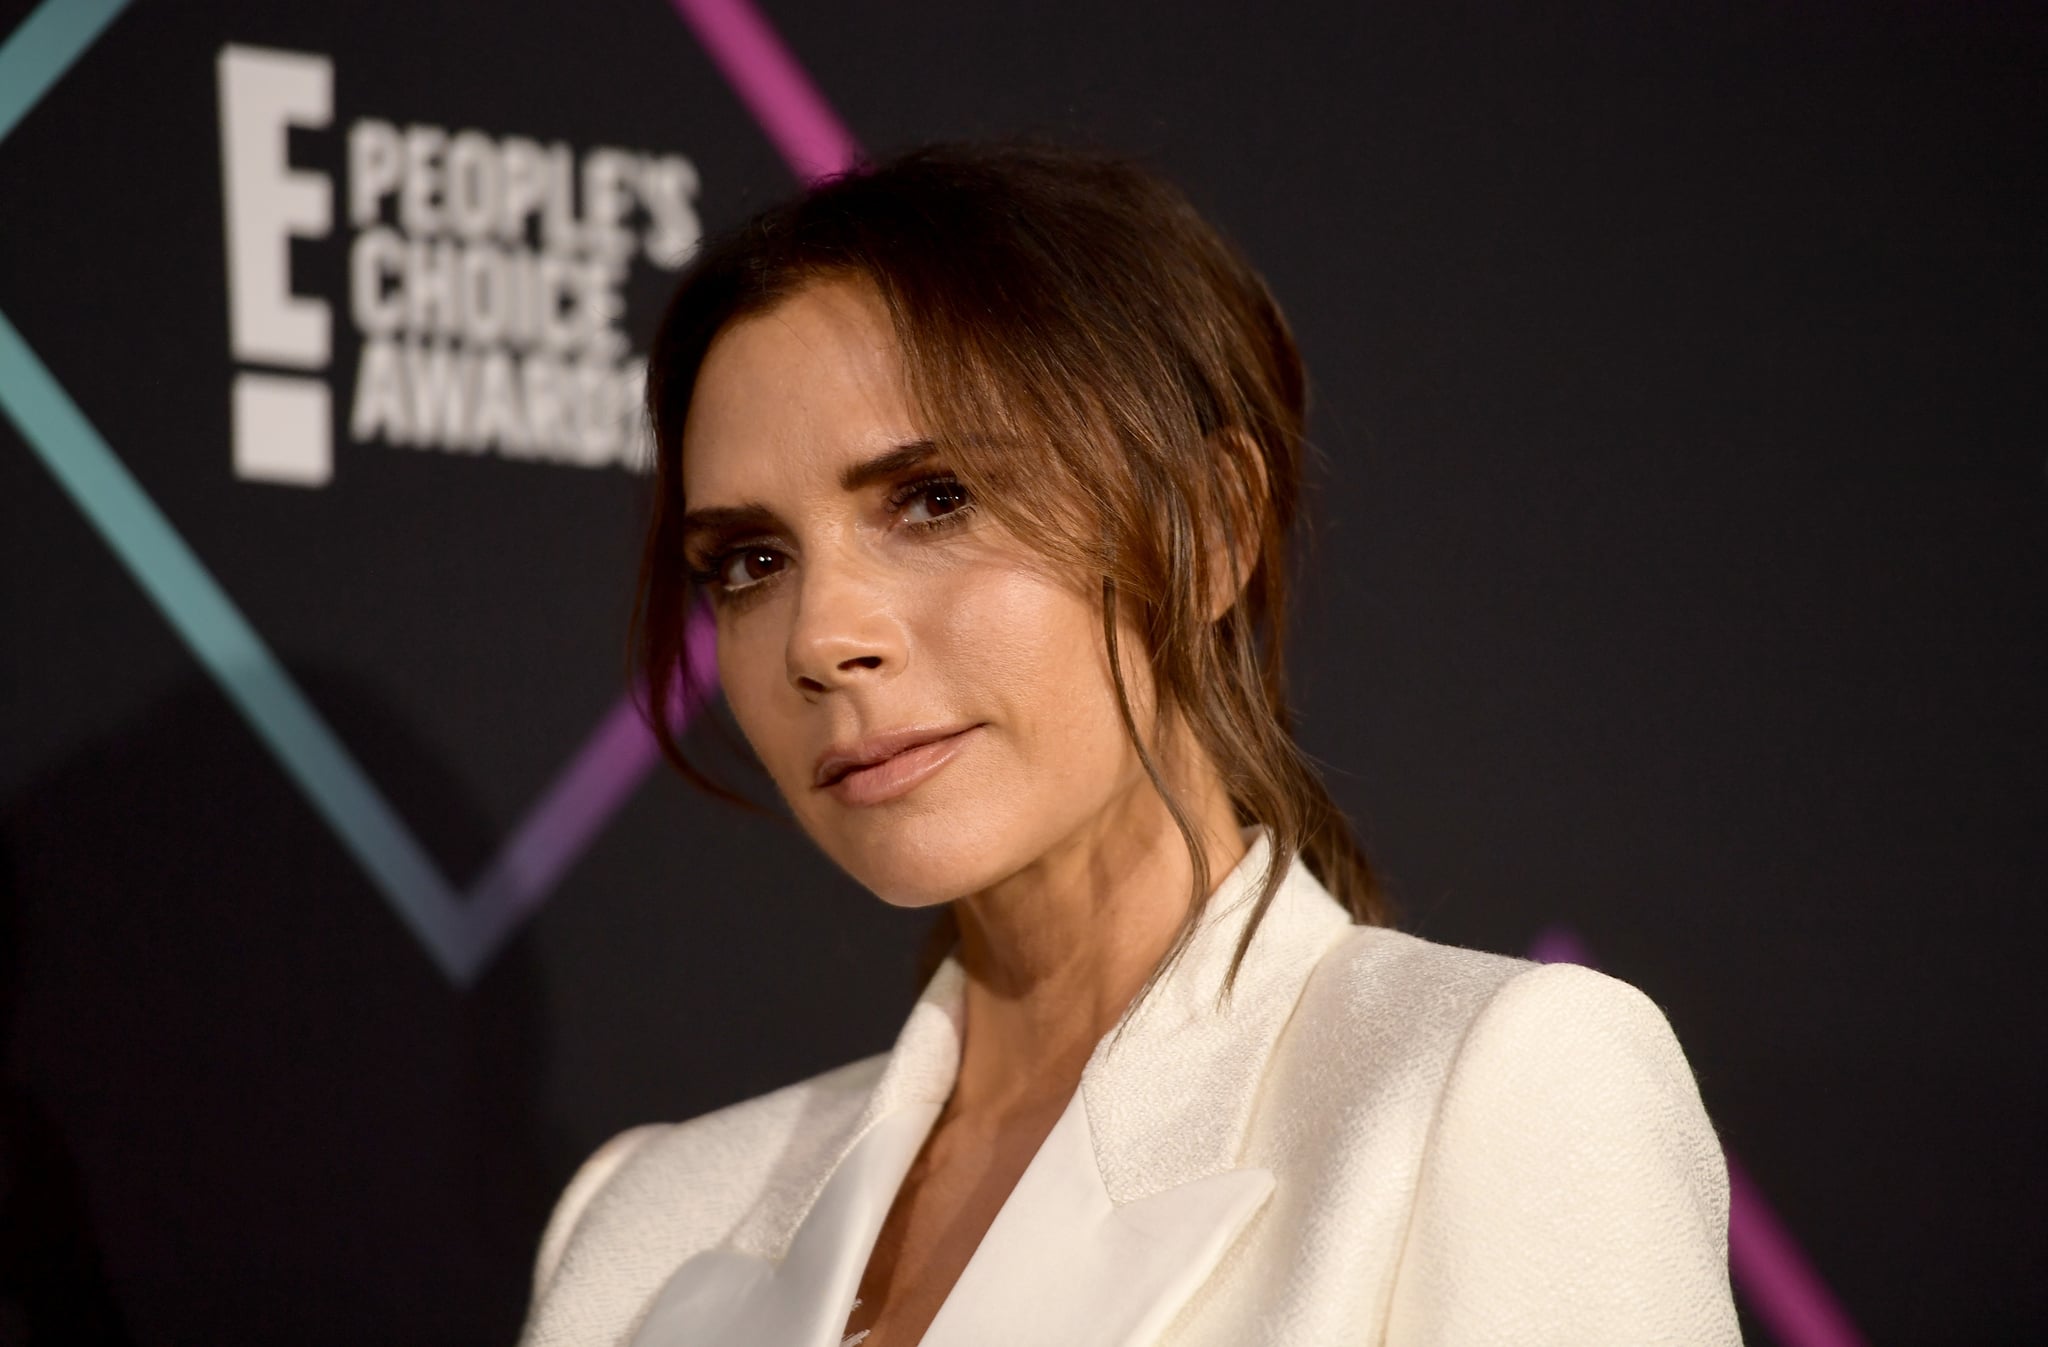 SANTA MONICA, CA - NOVEMBER 11:  Victoria Beckham, recipient of the 2018 Fashion Icon Award, poses in the press room during the People's Choice Awards 2018 at Barker Hangar on November 11, 2018 in Santa Monica, California.  (Photo by Matt Winkelmeyer/Getty Images)